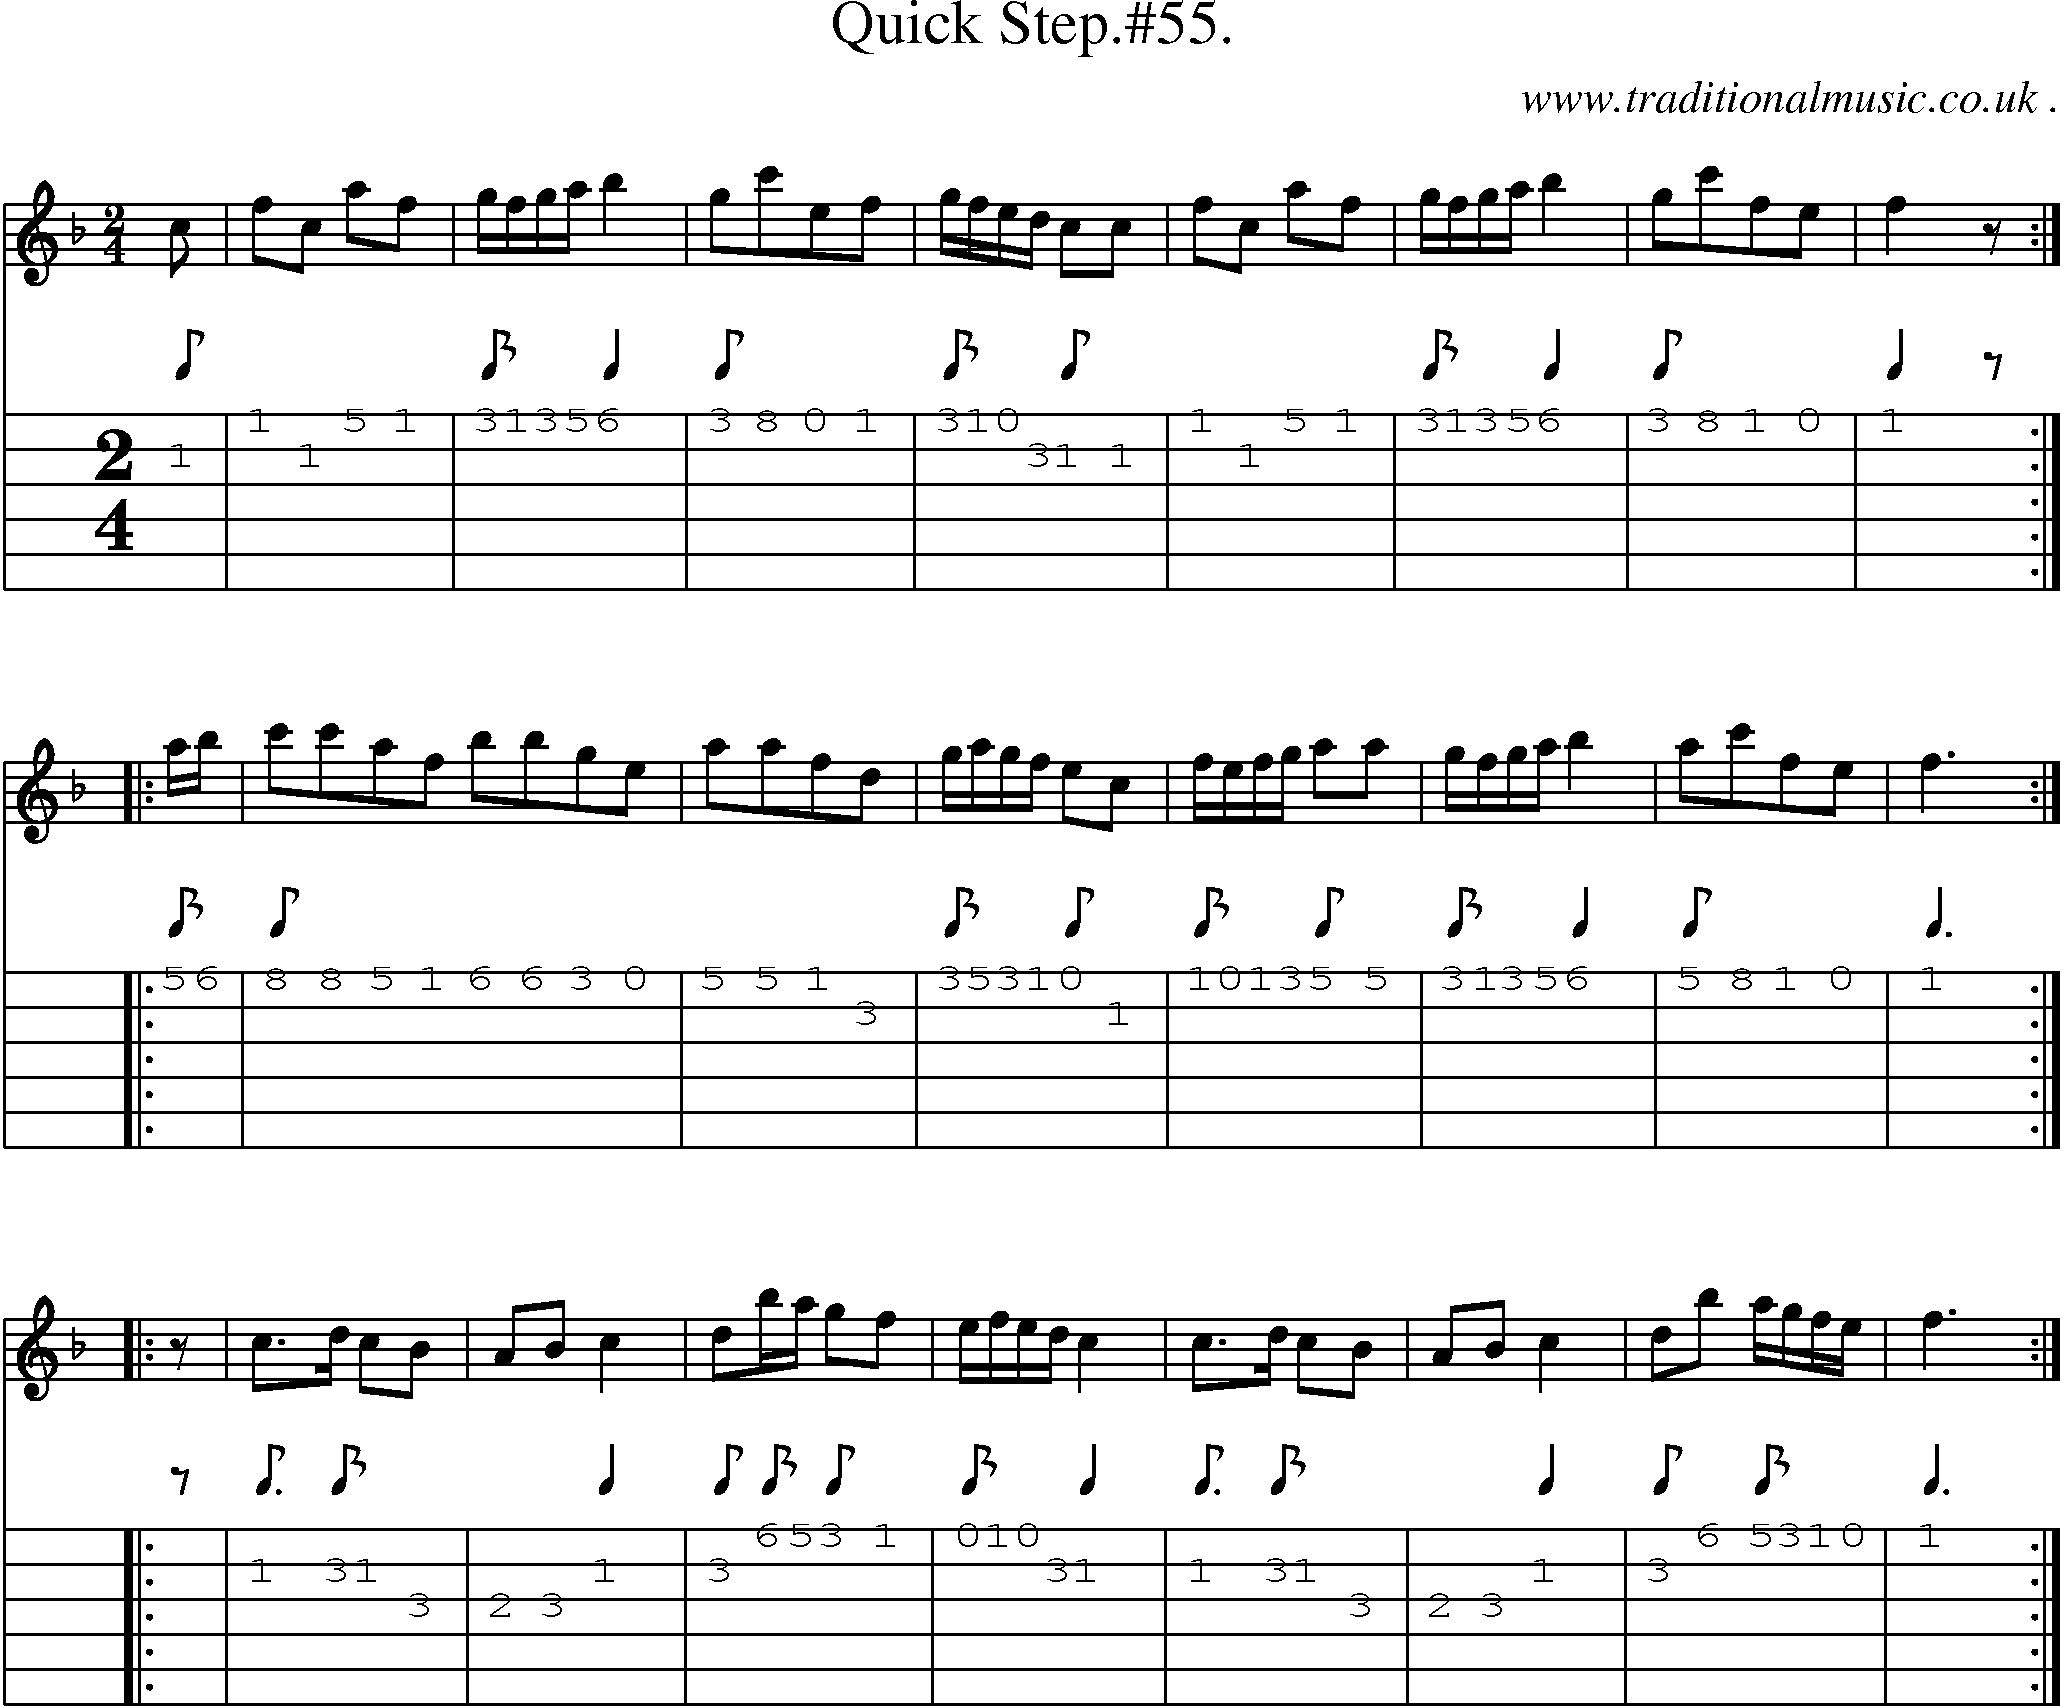 Sheet-Music and Guitar Tabs for Quick Step55